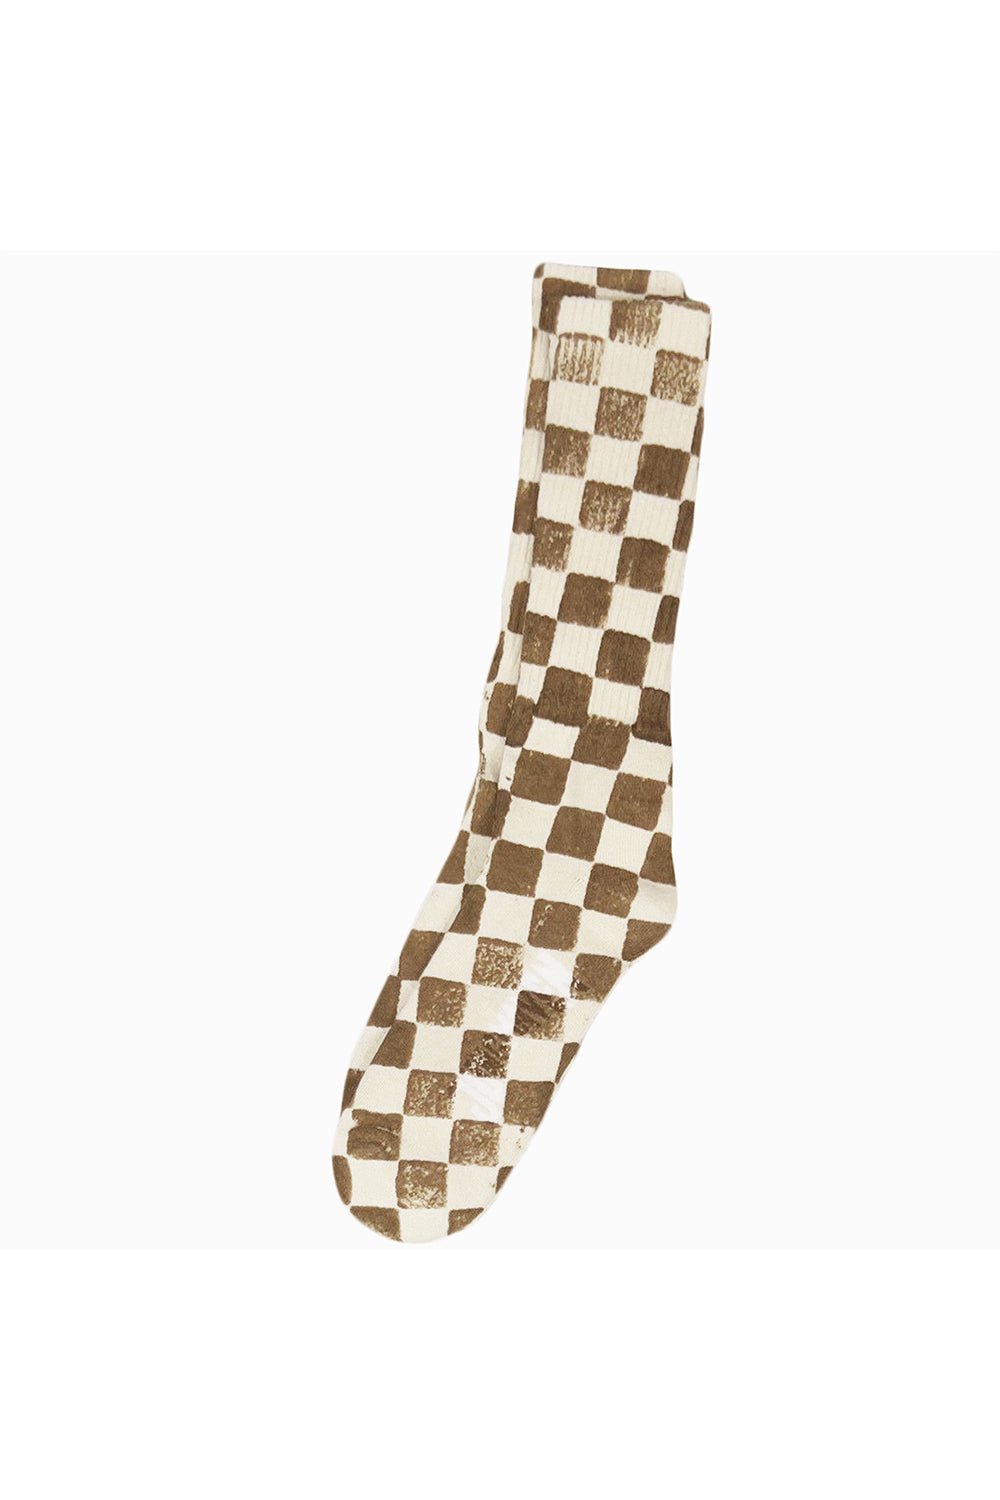 Marian Monogram Socks for Adults - One Size Fits Most - NEW ITEM SALE!